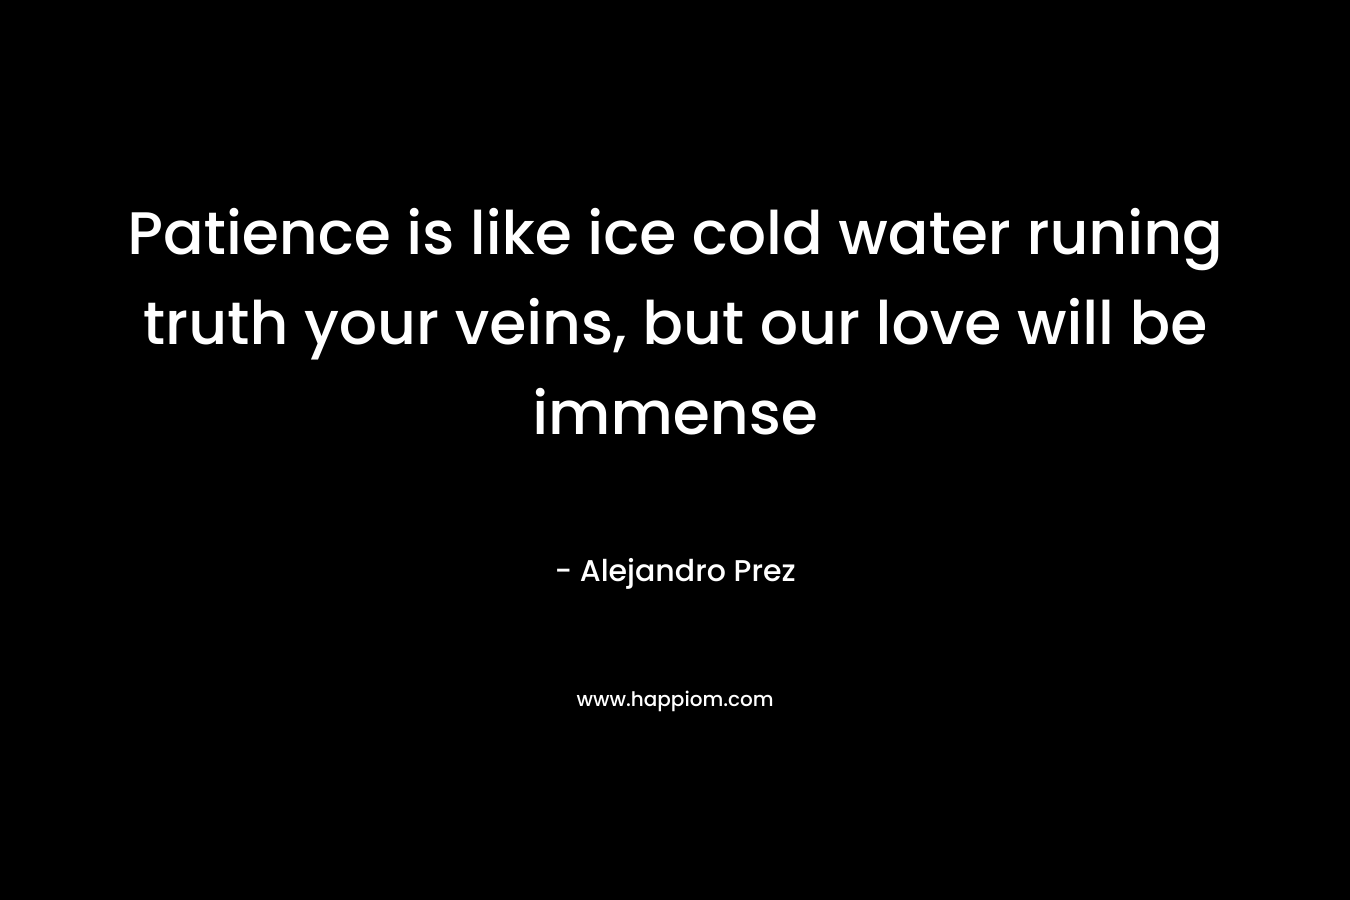 Patience is like ice cold water runing truth your veins, but our love will be immense – Alejandro Prez